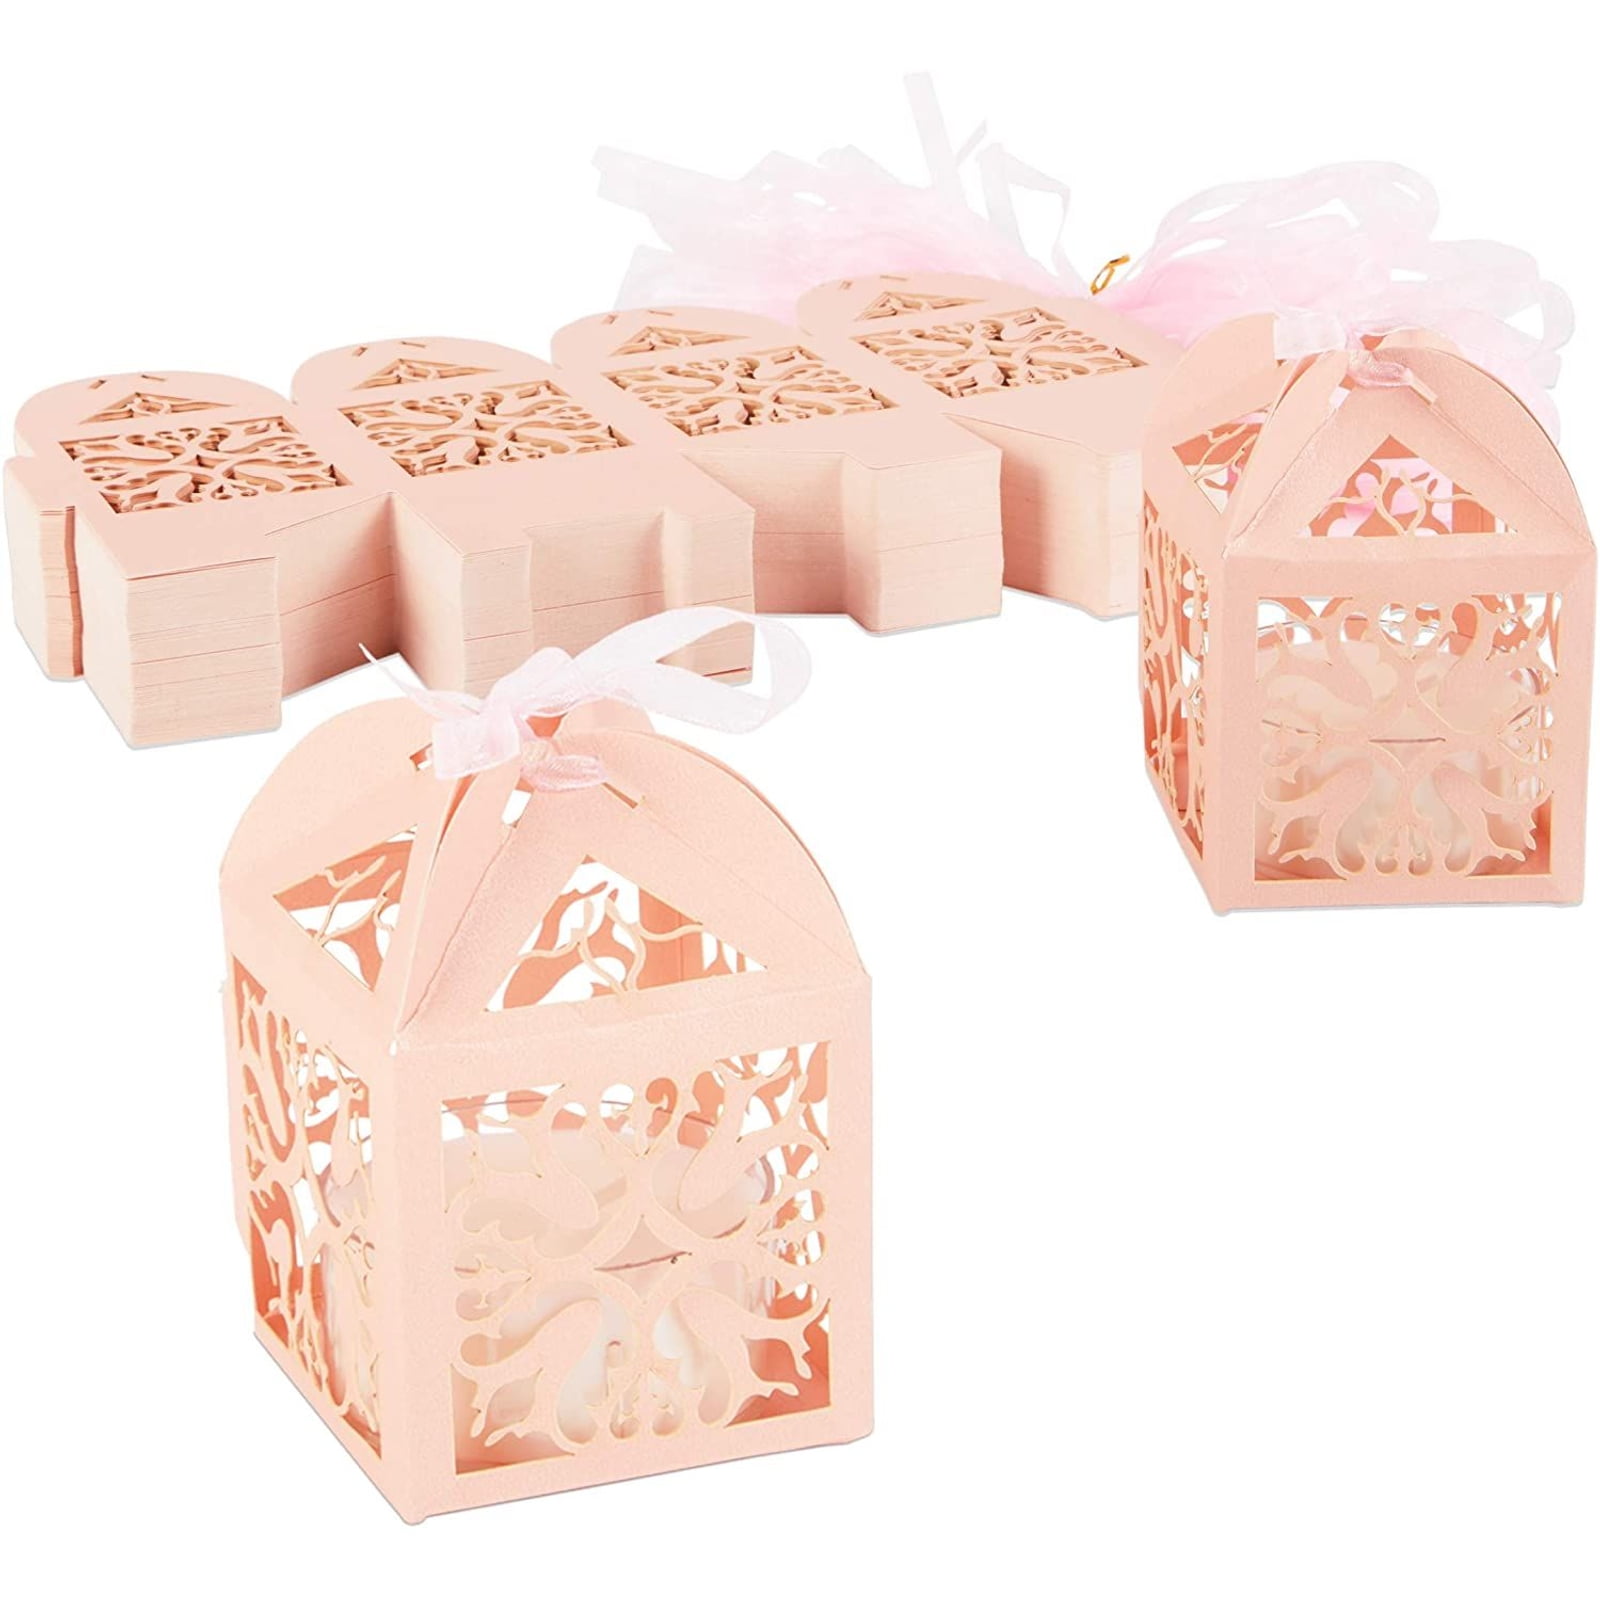 10X Hollow Heart Bird Style Wedding Favor Candy Box Gift Cake Baby Shower Boxes 